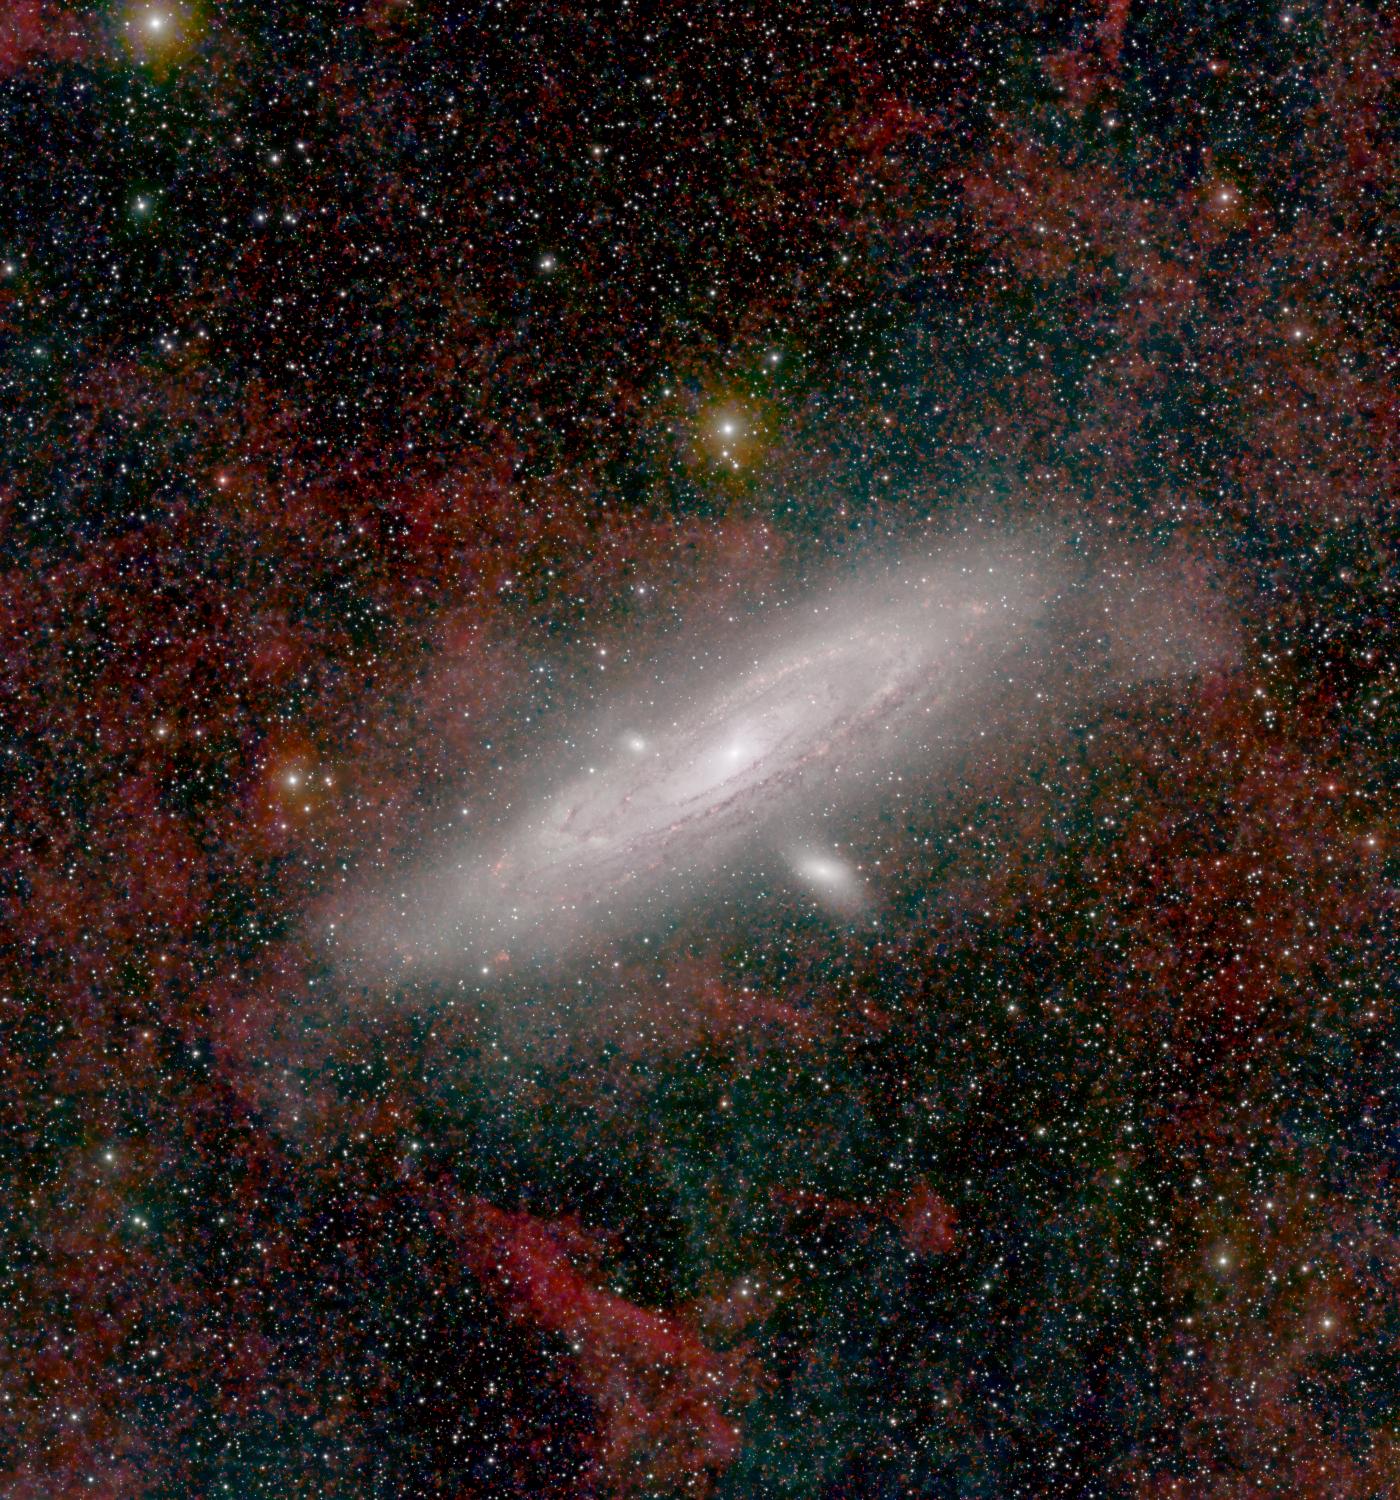 M31 with halo and including its companions M31 and M110